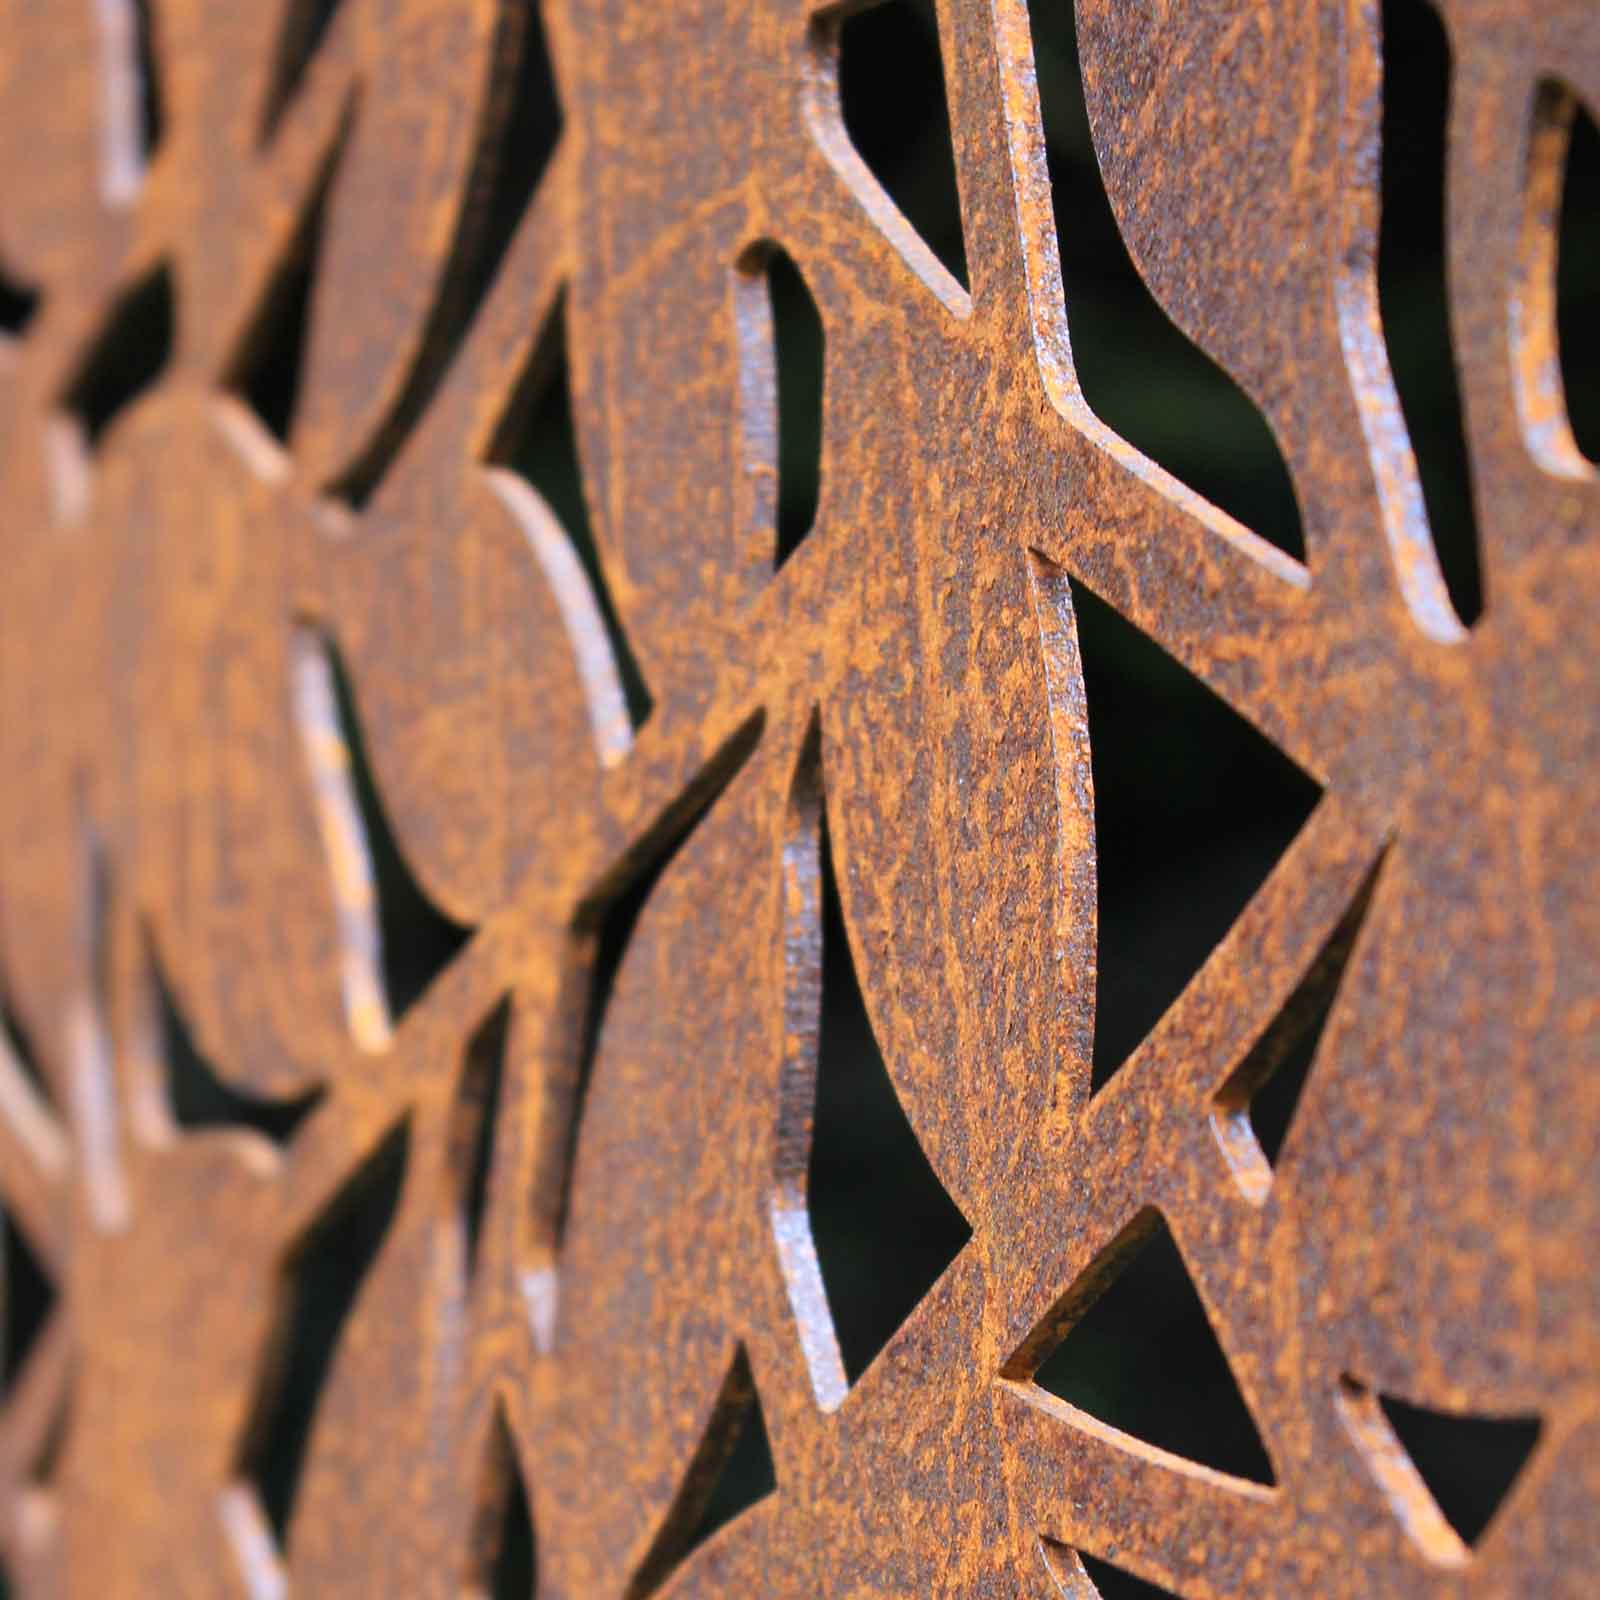 These Corten Steel Screens with stunning branches design are made of weathe...